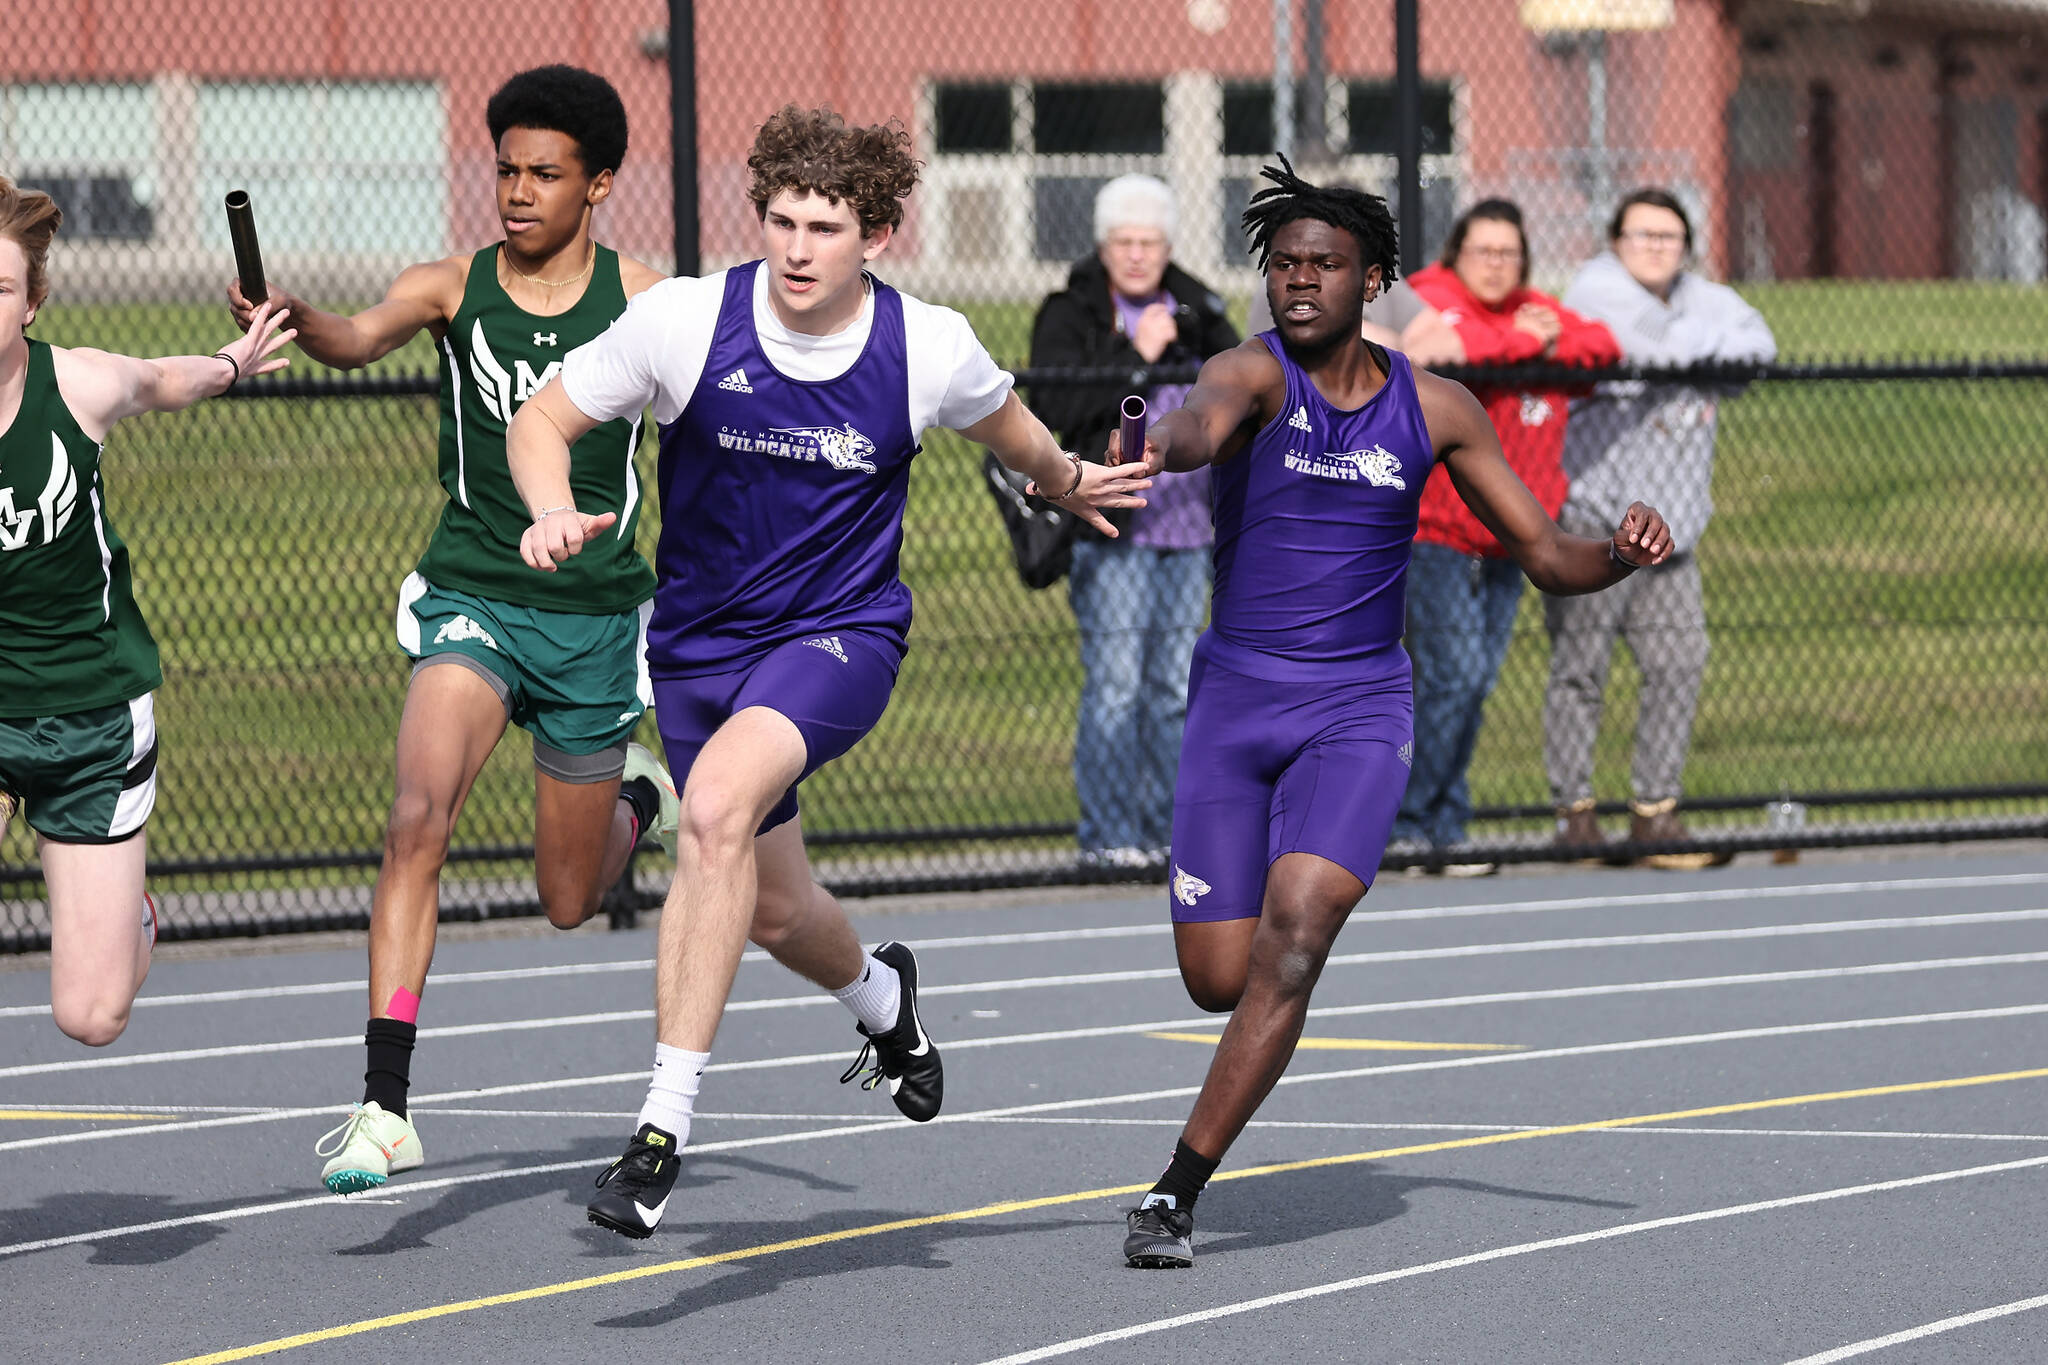 Photos by John Fisken
Sophomore Michael Johnson-Howard, right, passes the baton to junior Barrett Schmall during the 4 x 100 meter relay. The relay team took second place with a time of 45.37 seconds.